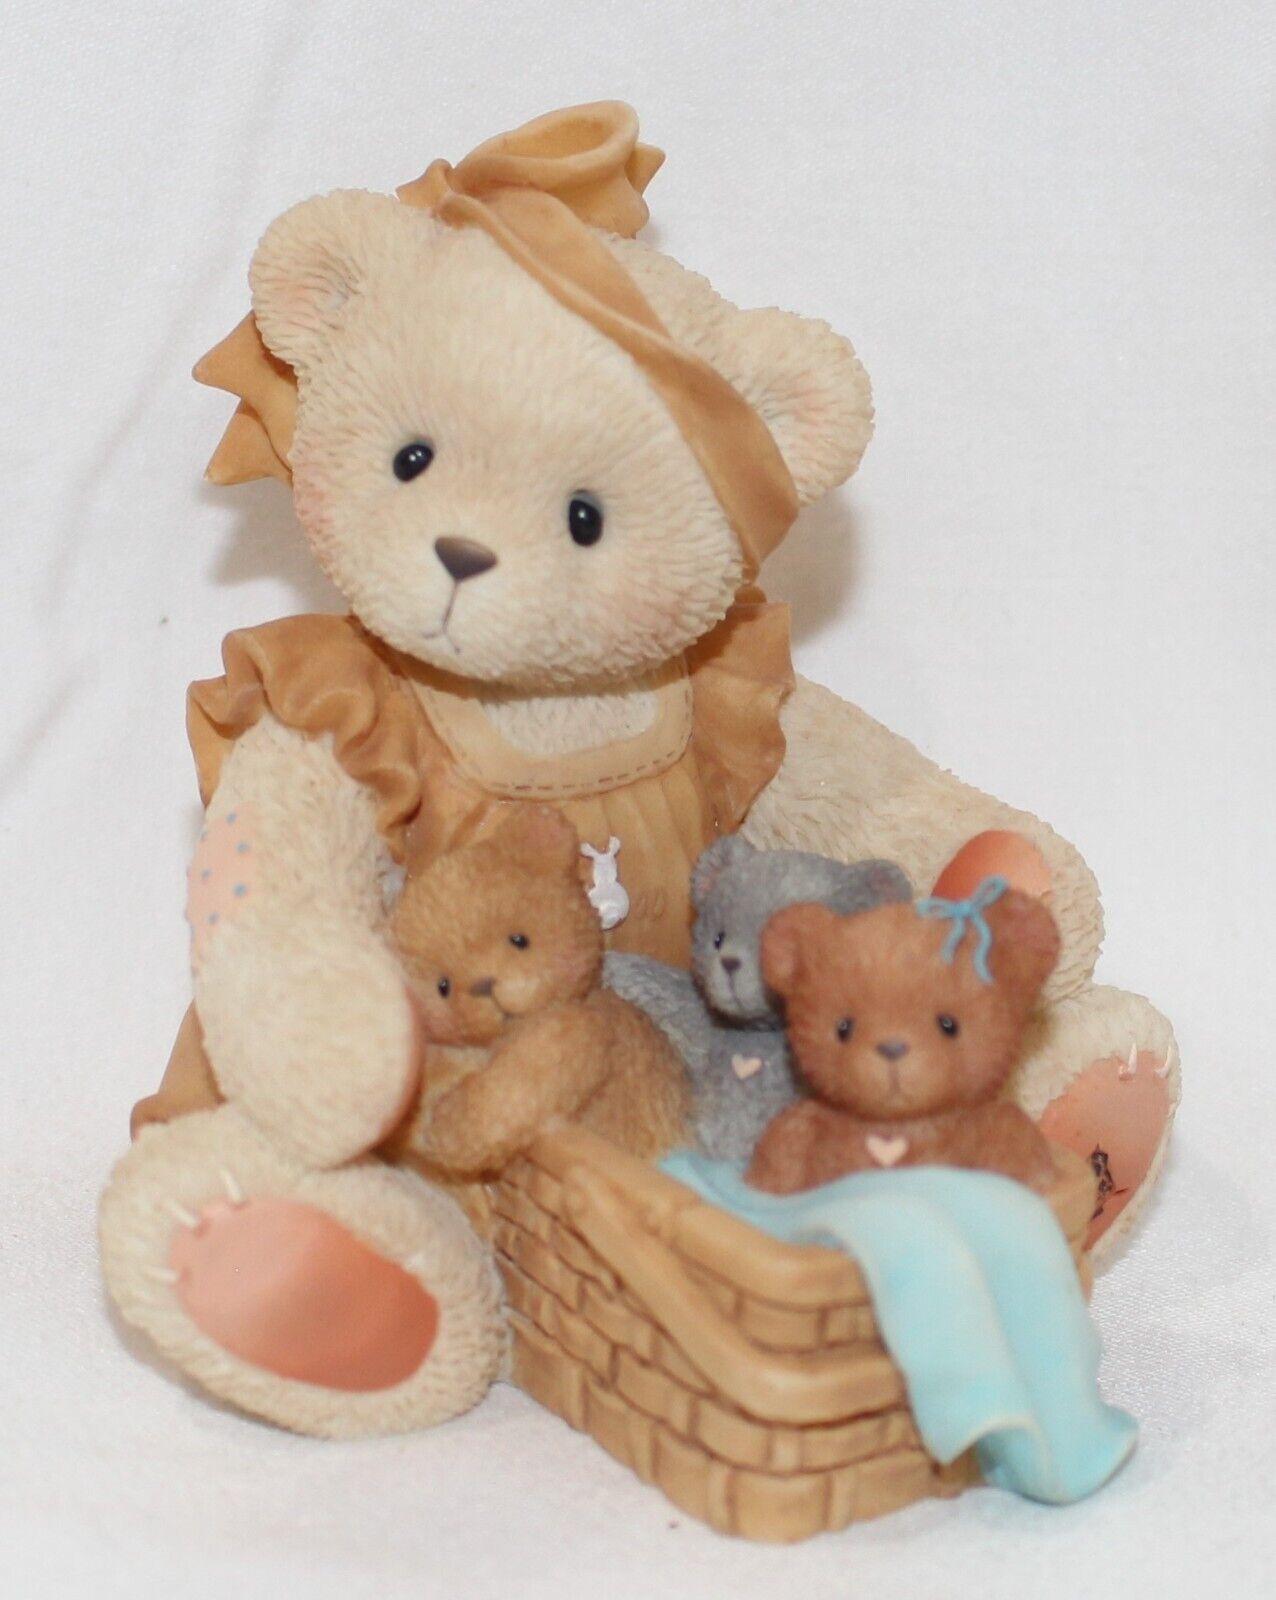 Cherished Teddies - When Your Hands Are Full Theres Room In Your Heart - 476595R